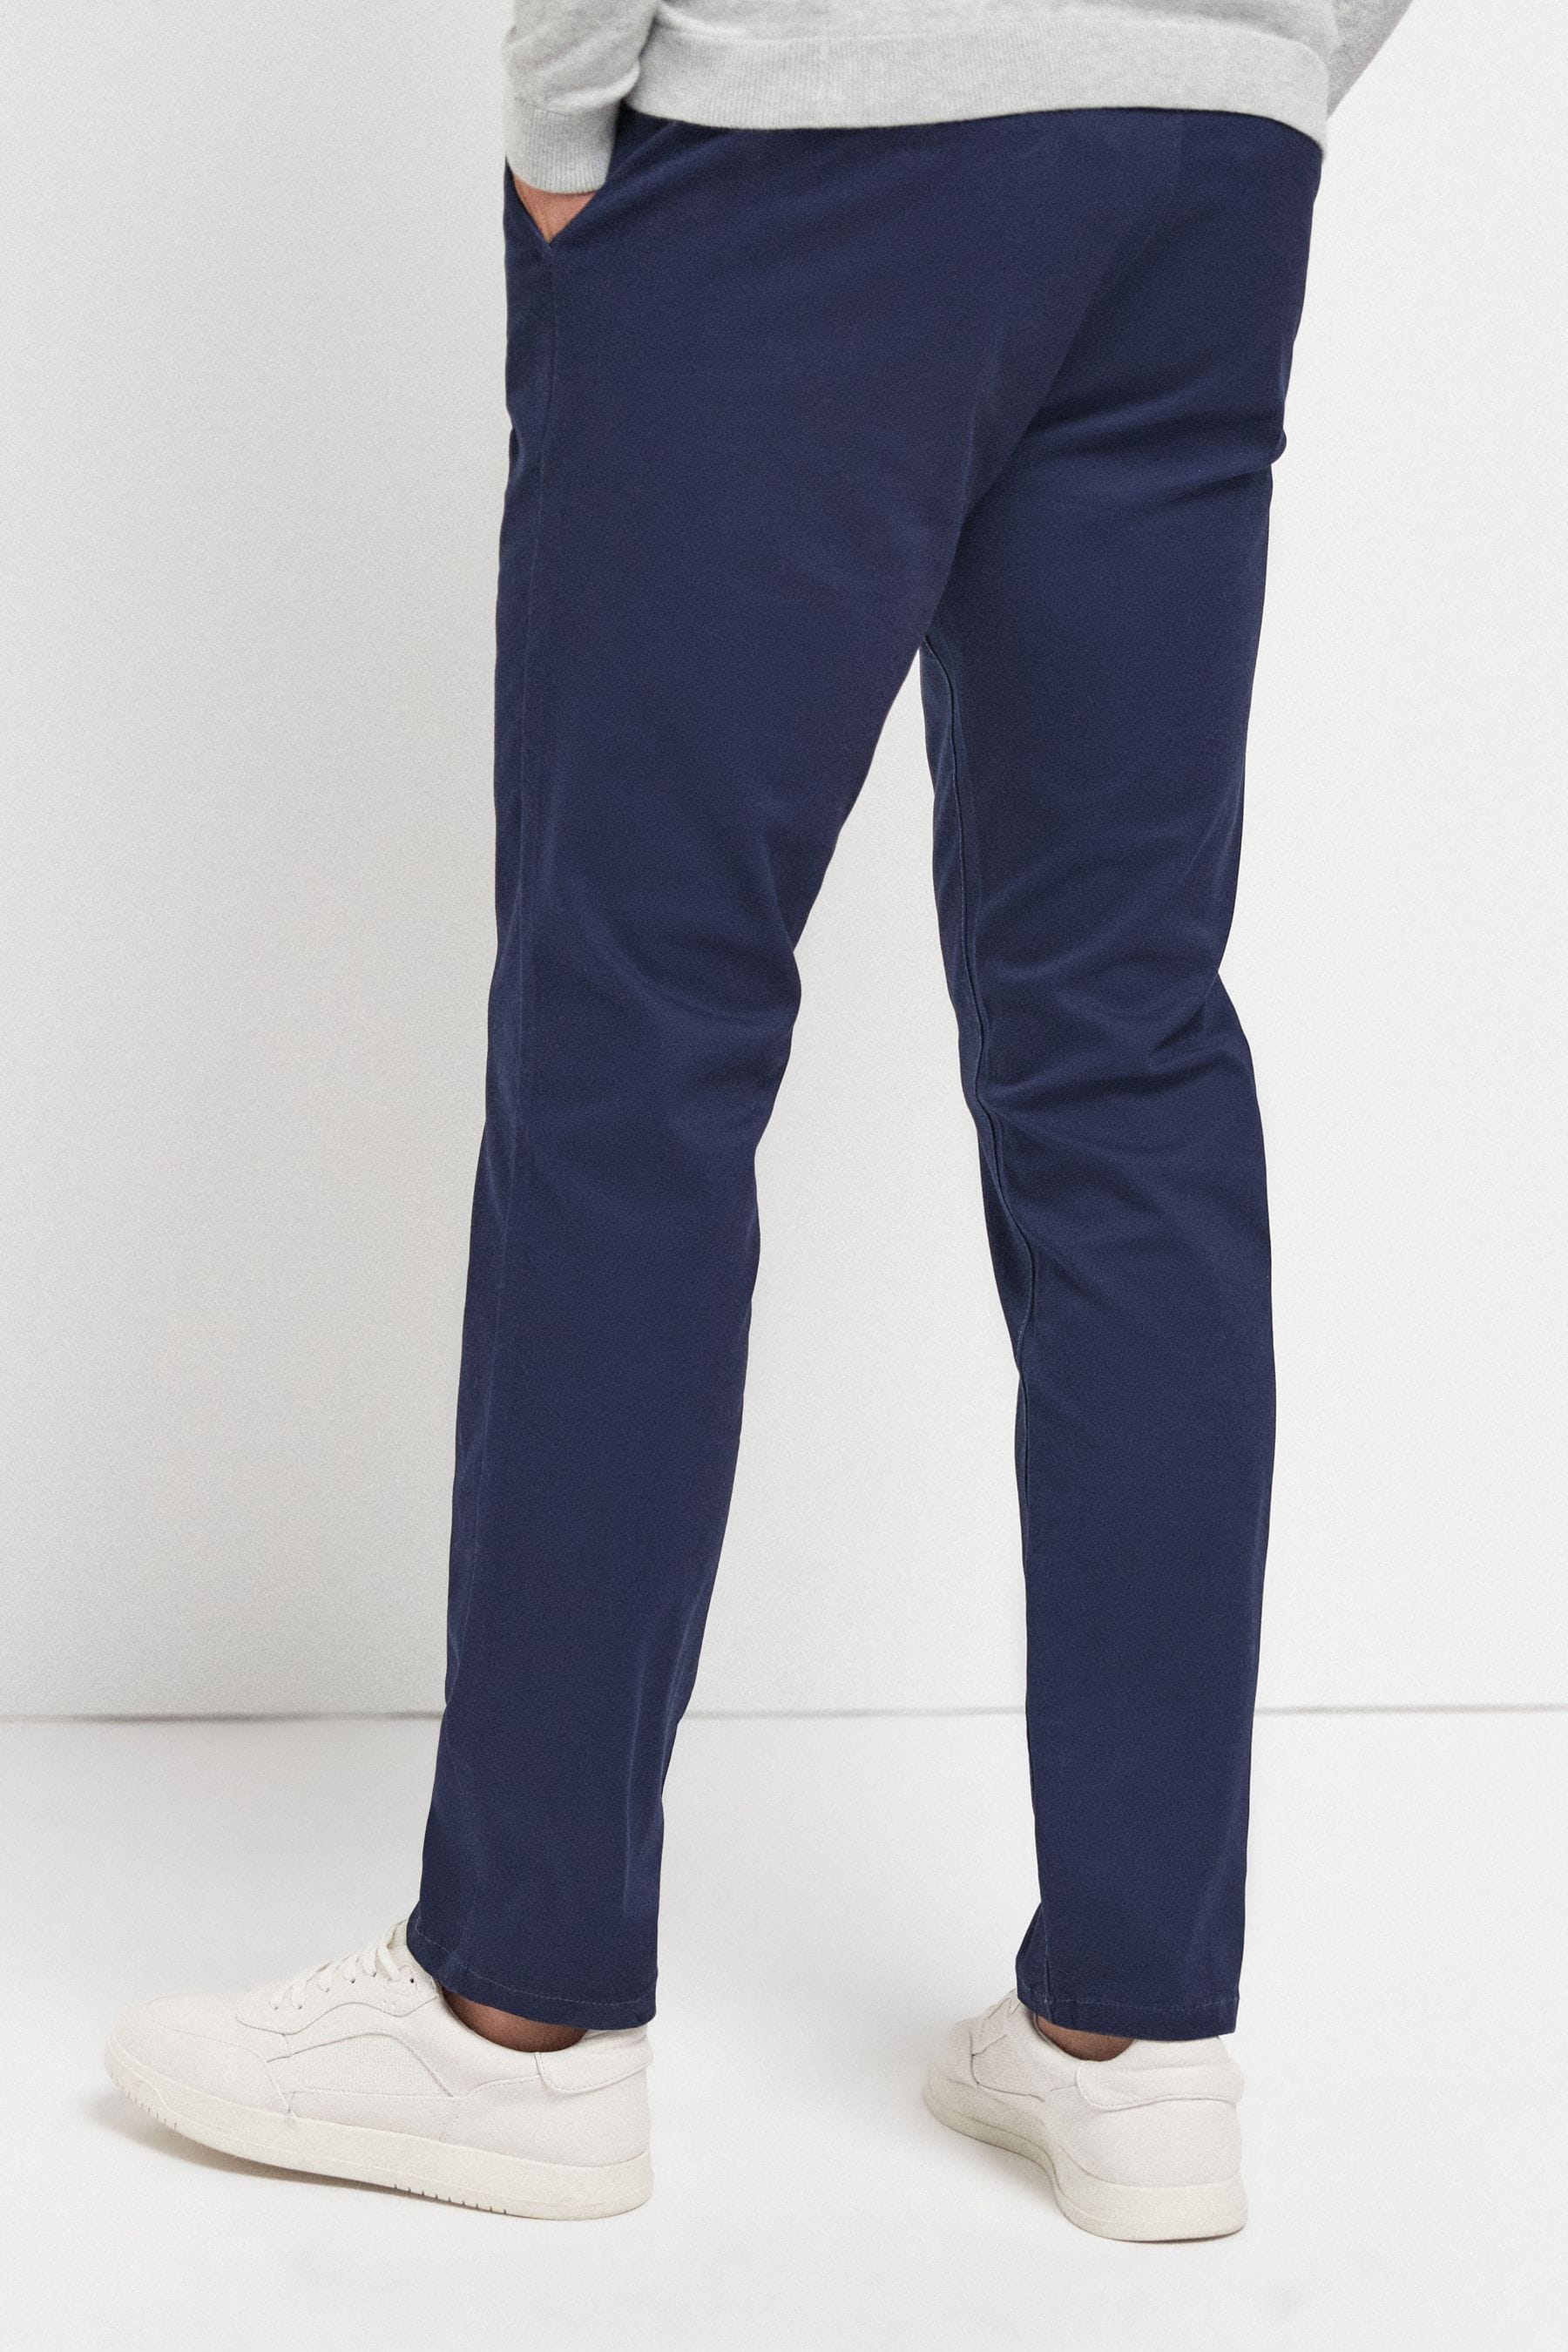 Buy French Navy Slim Fit Stretch Chinos Trousers from the Next UK ...